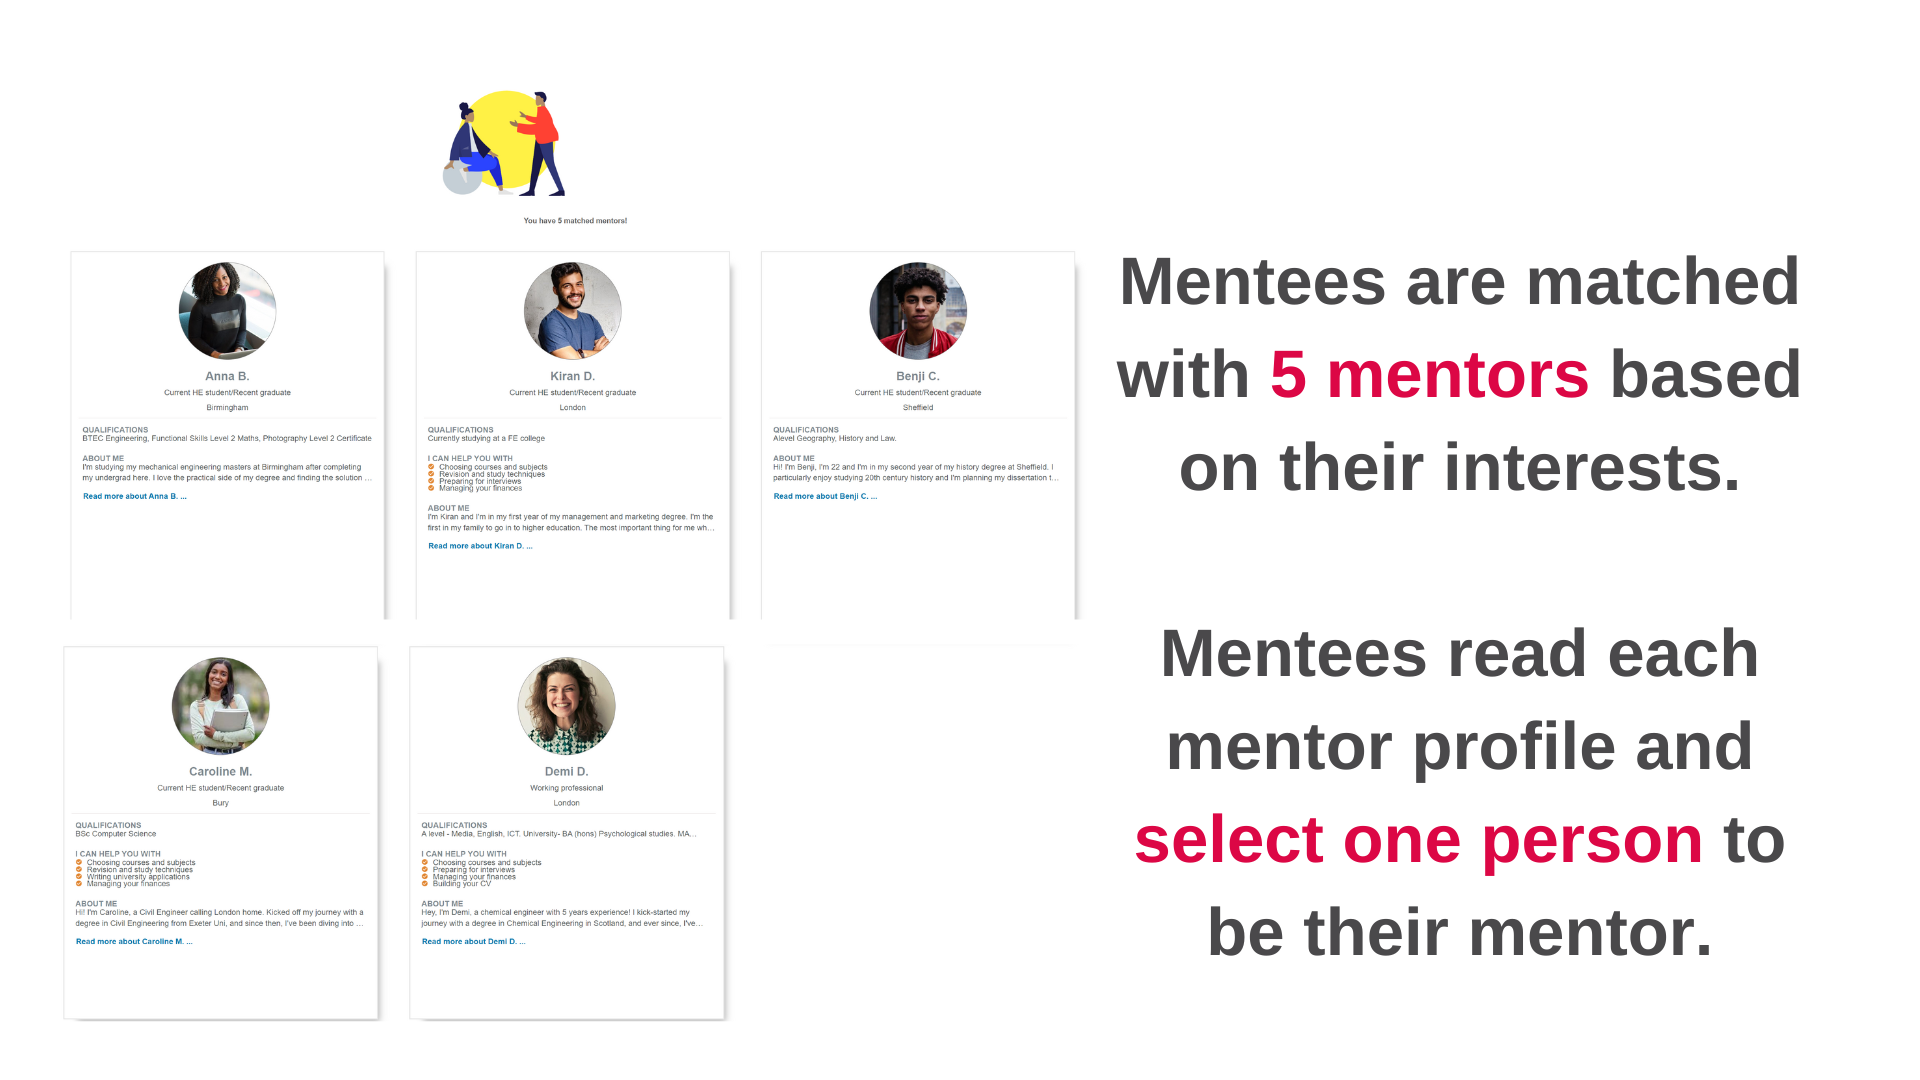 Mentees are matched with 5 mentors based on their interests. Mentees read each mentor profile and select one person to be their mentor.